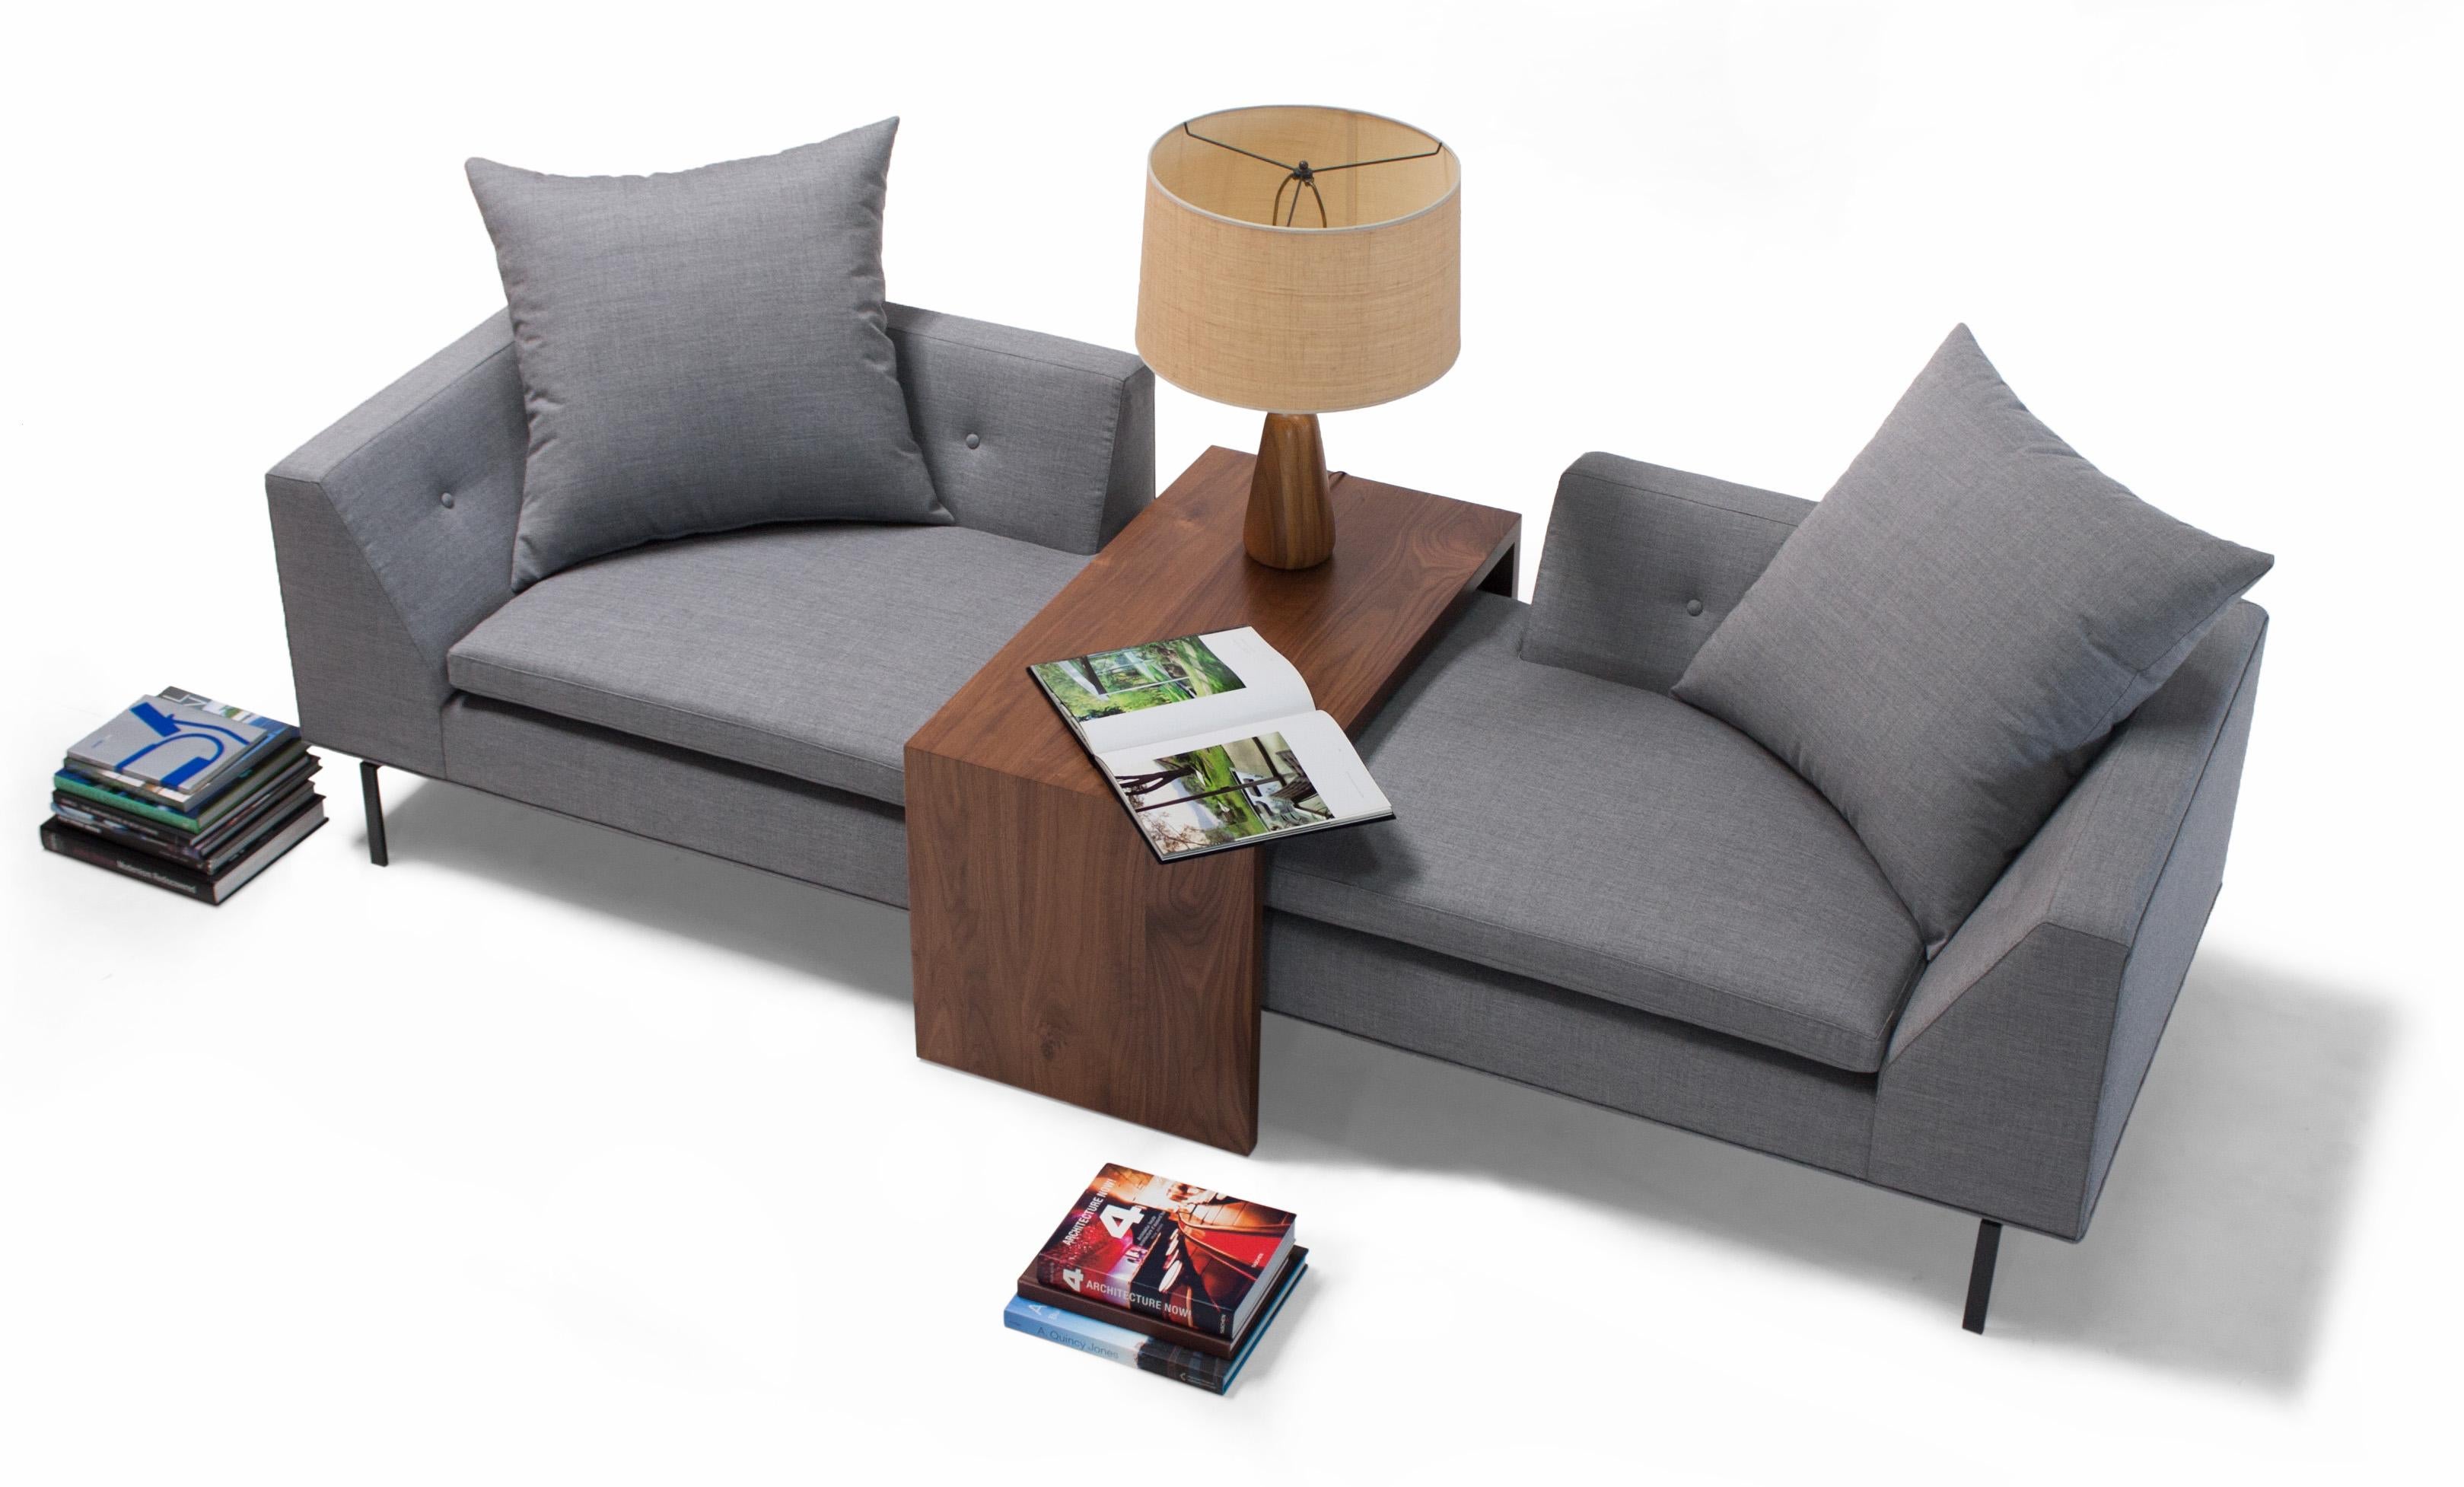 Clean-lined and comfortable, the Fratelli Group is made up of two chairs and a solid wood table and can be arranged in a traditional “sofa” style or as a deep, relaxing lounge. The integrated table ensures easy access to lighting, drinks, and the